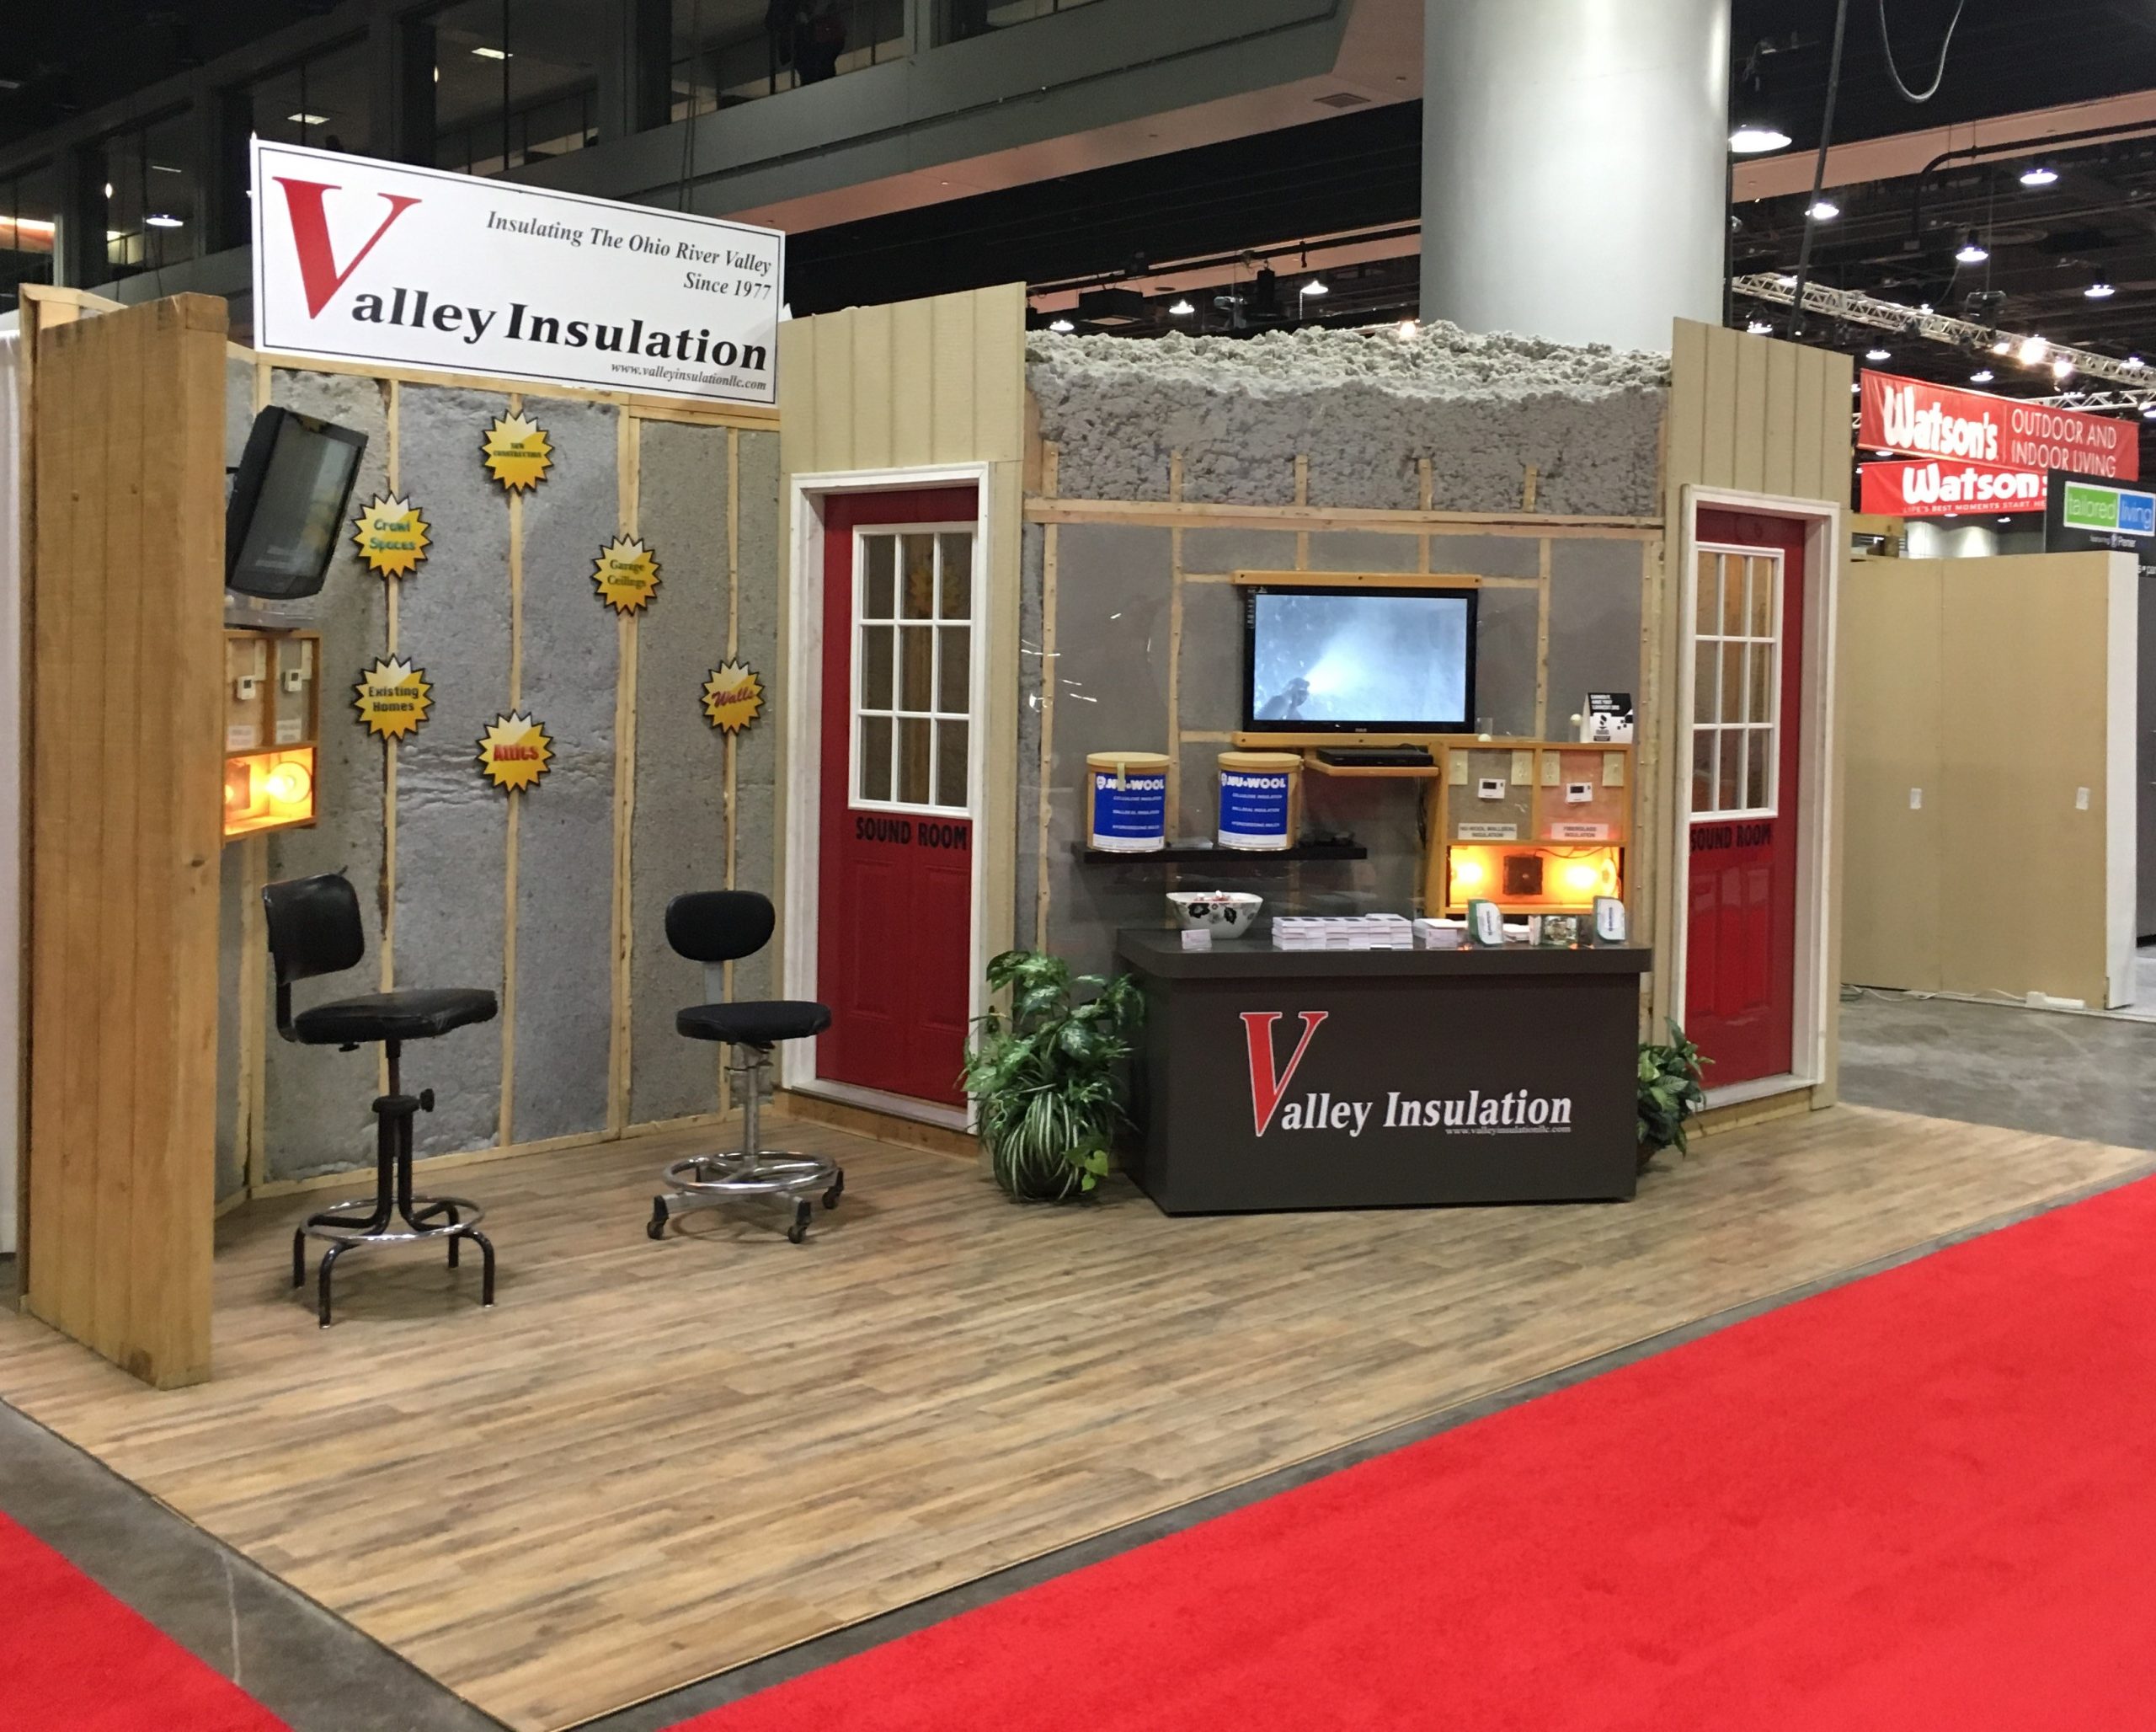 Valley Insulation Display at a Homebuilders Event